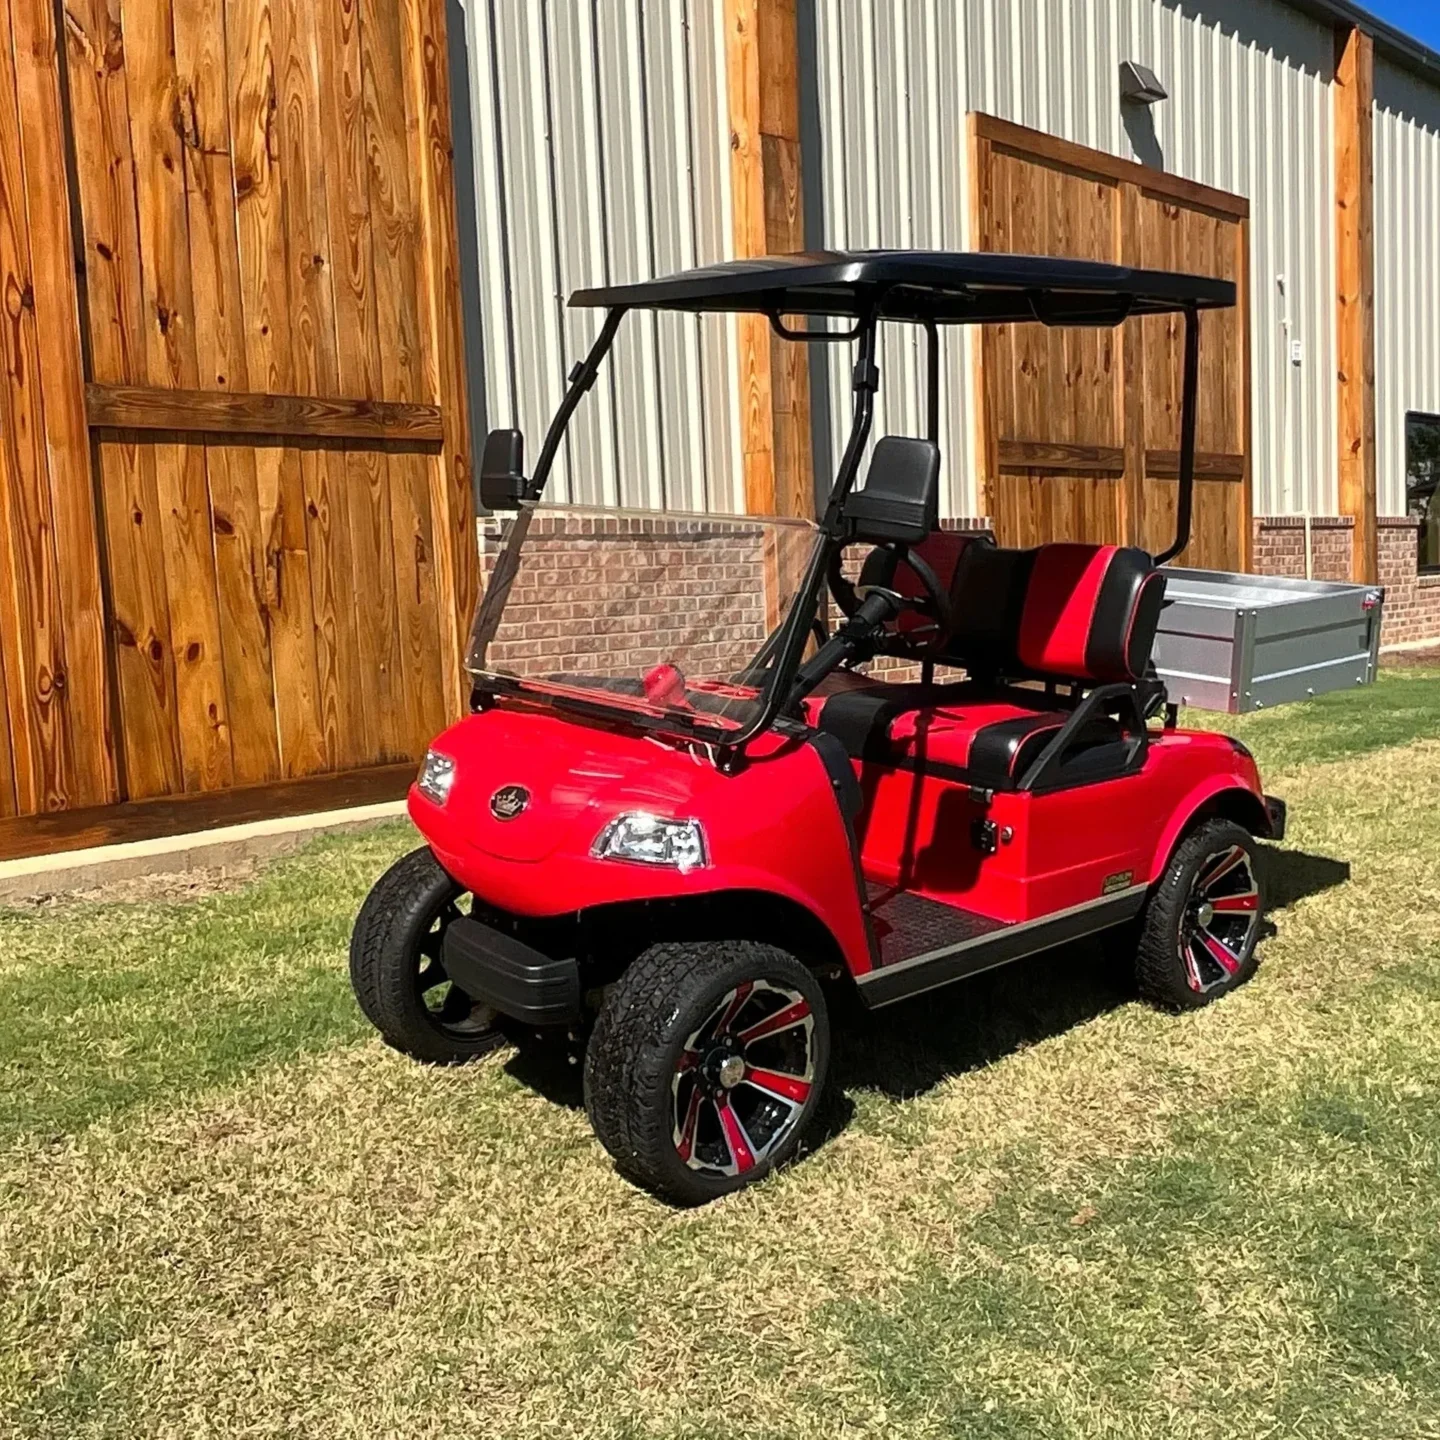 A red golf cart parked in the grass.